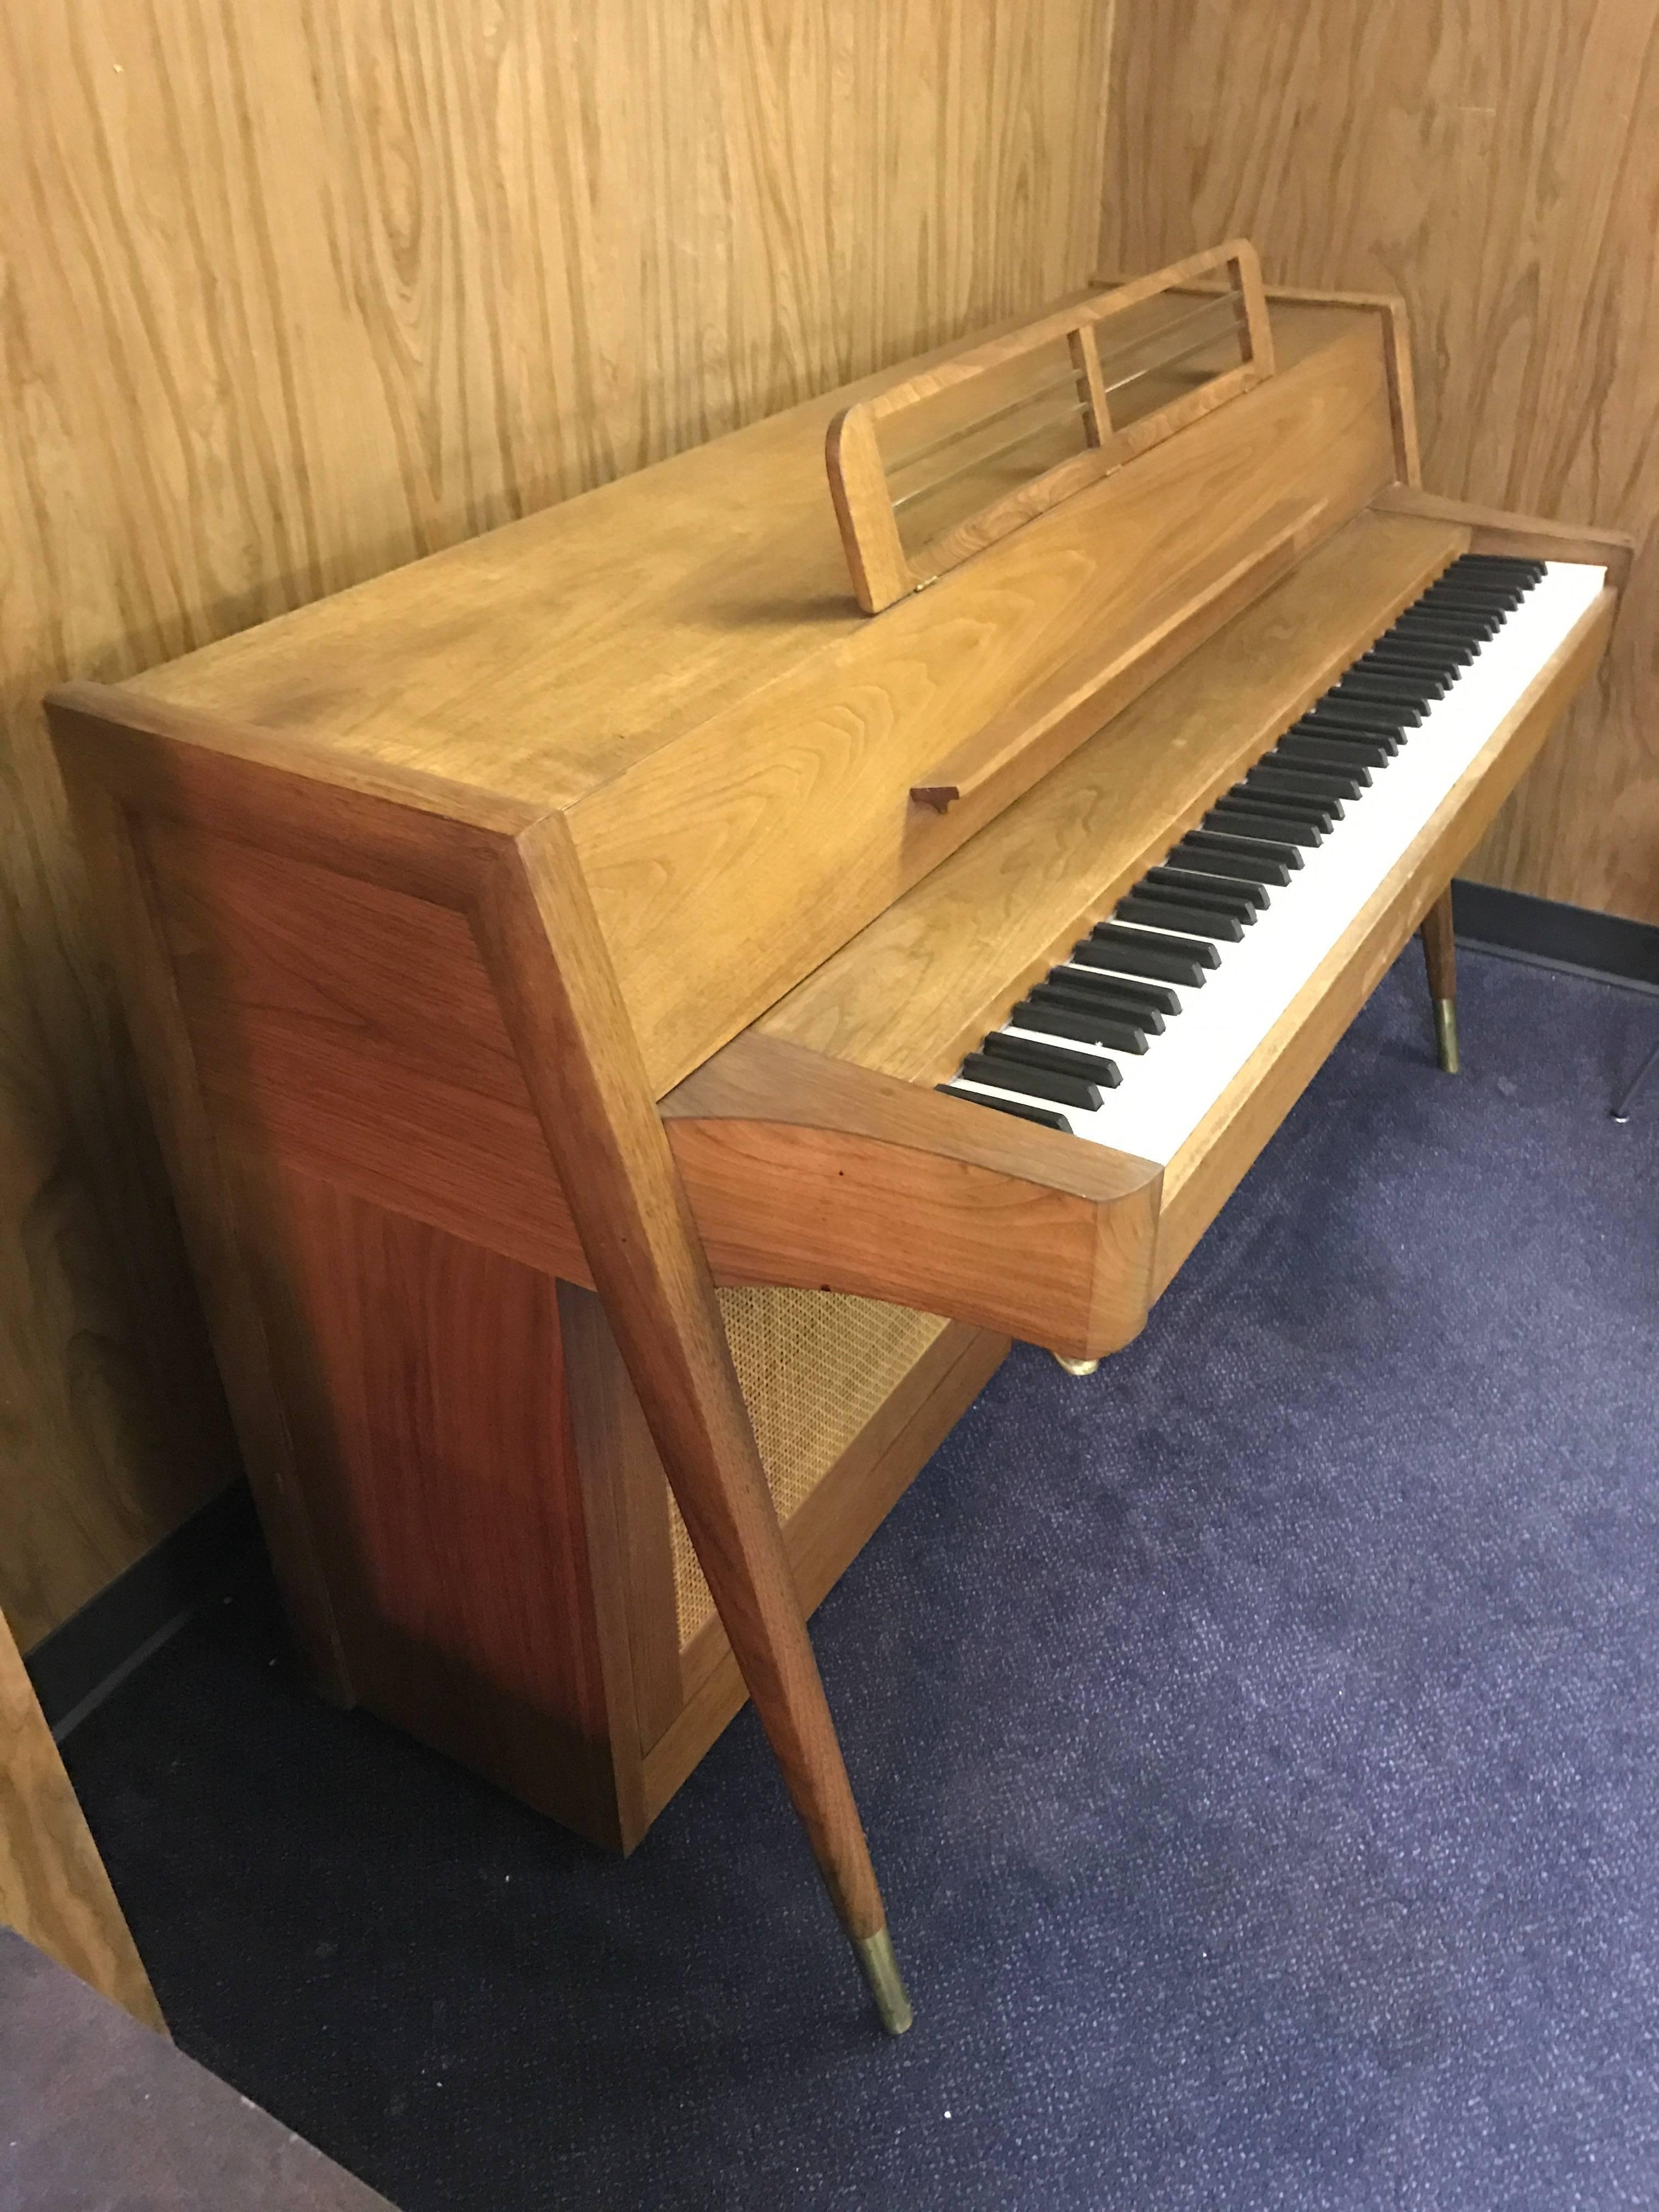 Teak spinet piano. This is a limited production piano by Baldwin produced between 1961-1964. It is stunning from all anglesand can be floated in a room. It plays great but of course can use a tuning. Some of the keys have been patched 
but